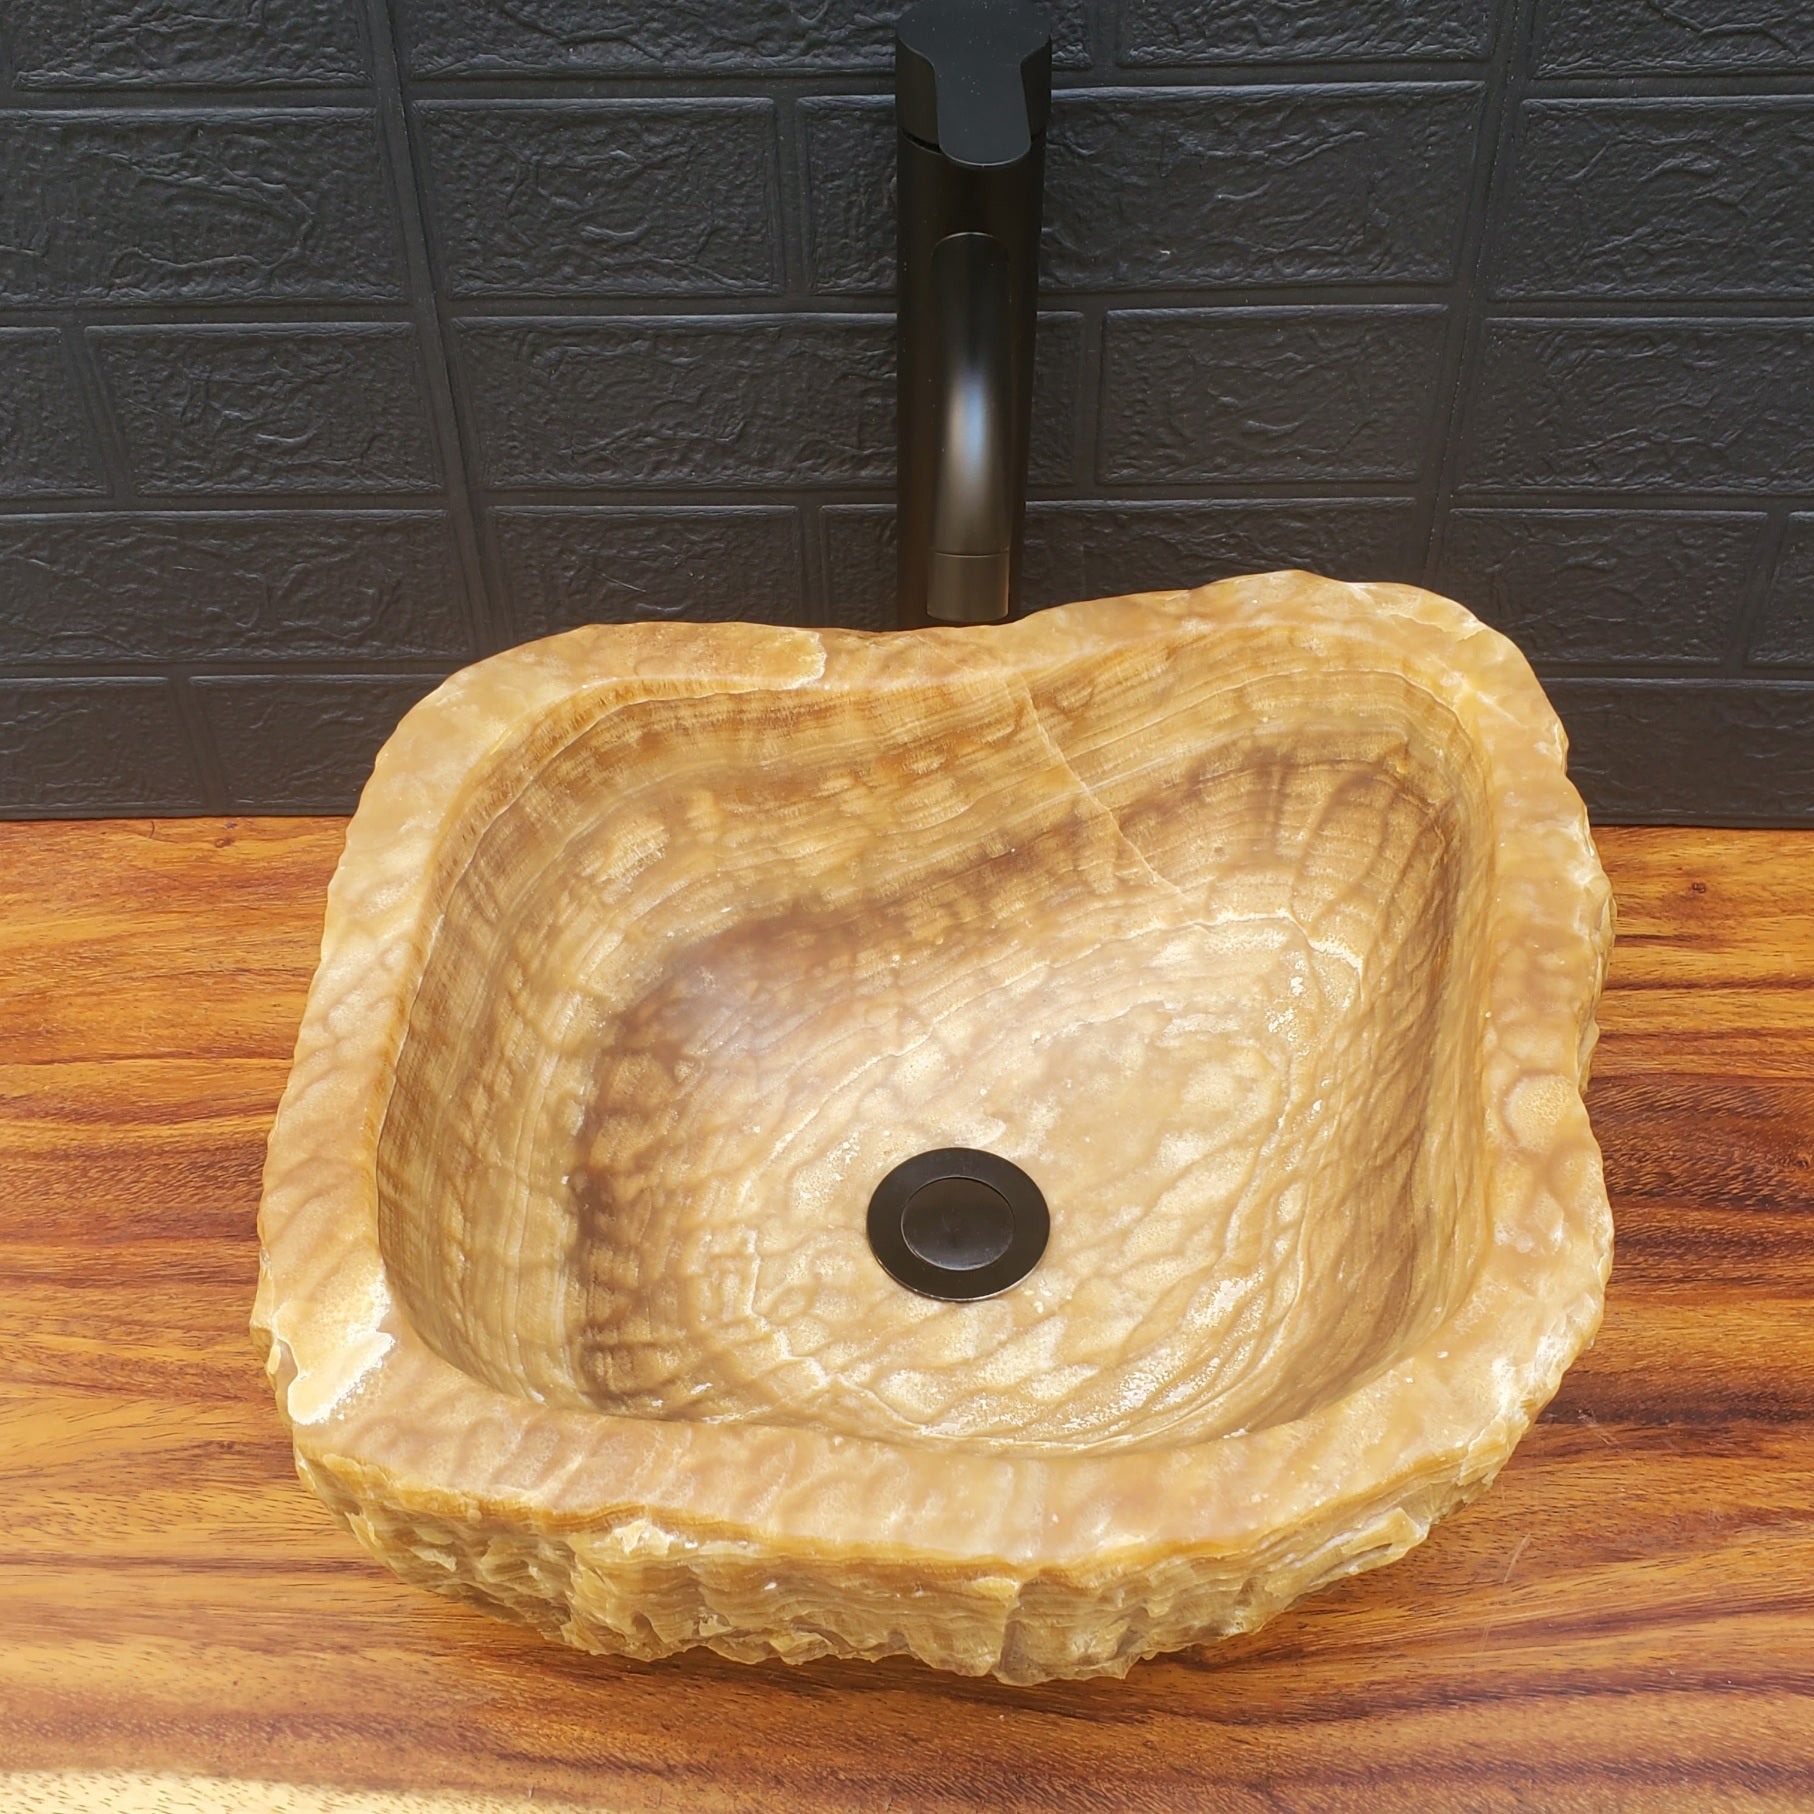 Brown Onyx Stone Bathroom Vessel Sink, Above Counter Sink, Handmade in Mexico. Hand Finished in USA. Buy now at www.felipeandgrace.com. 